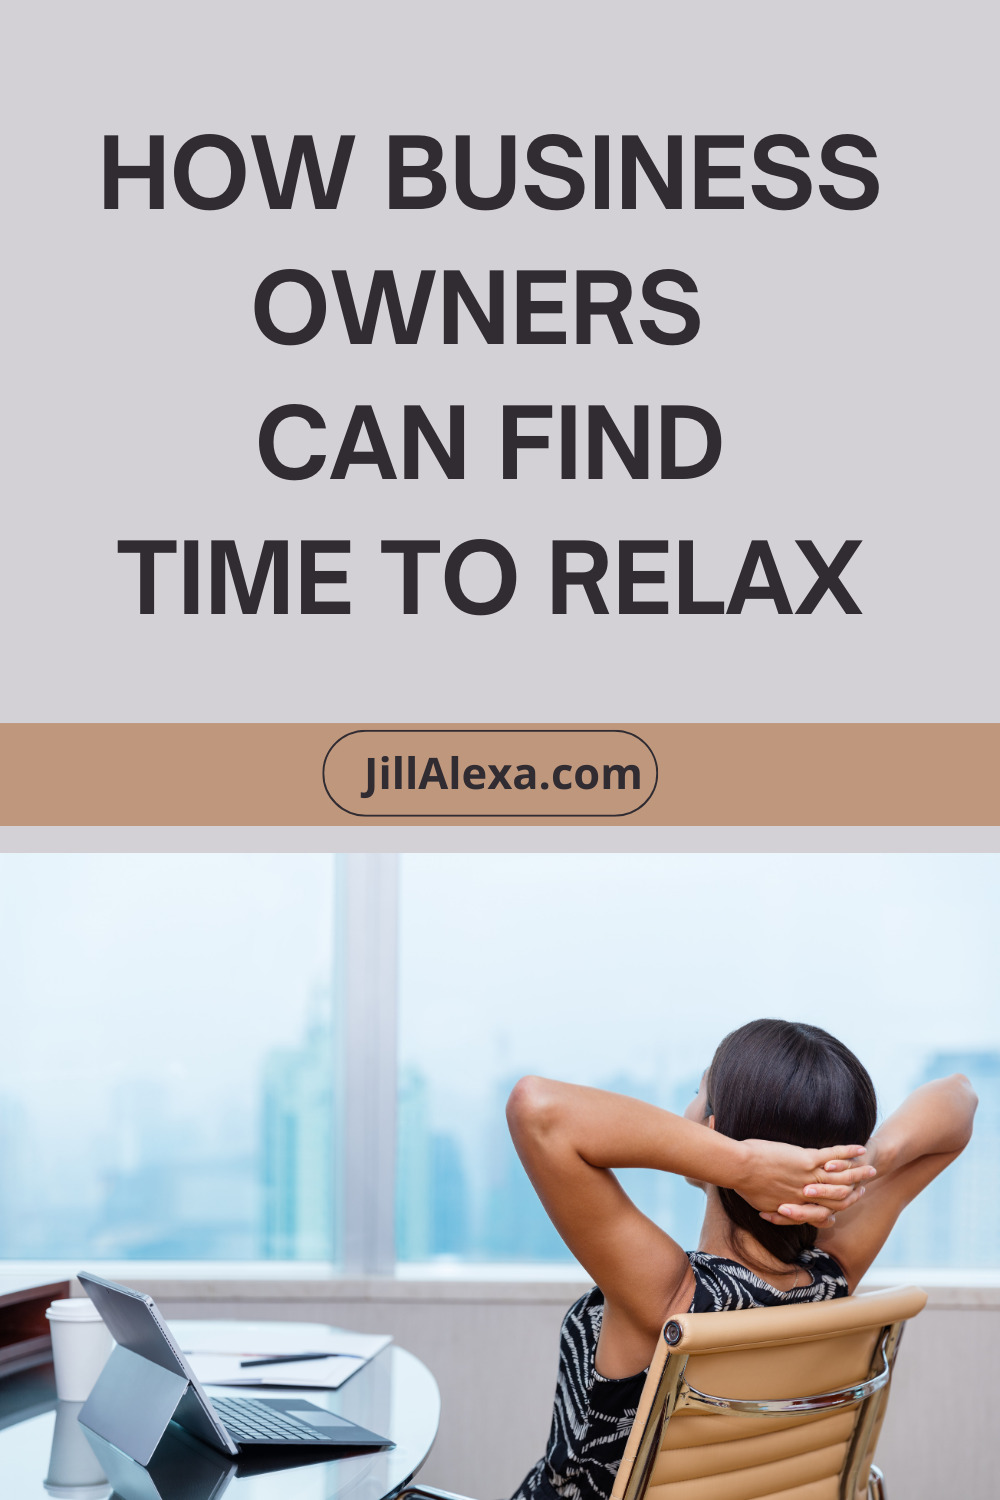 It's crucial for entrepreneurs to find relaxation time.  If you don’t, you run the risk of burning out.   Here's how business owners can find time to relax.